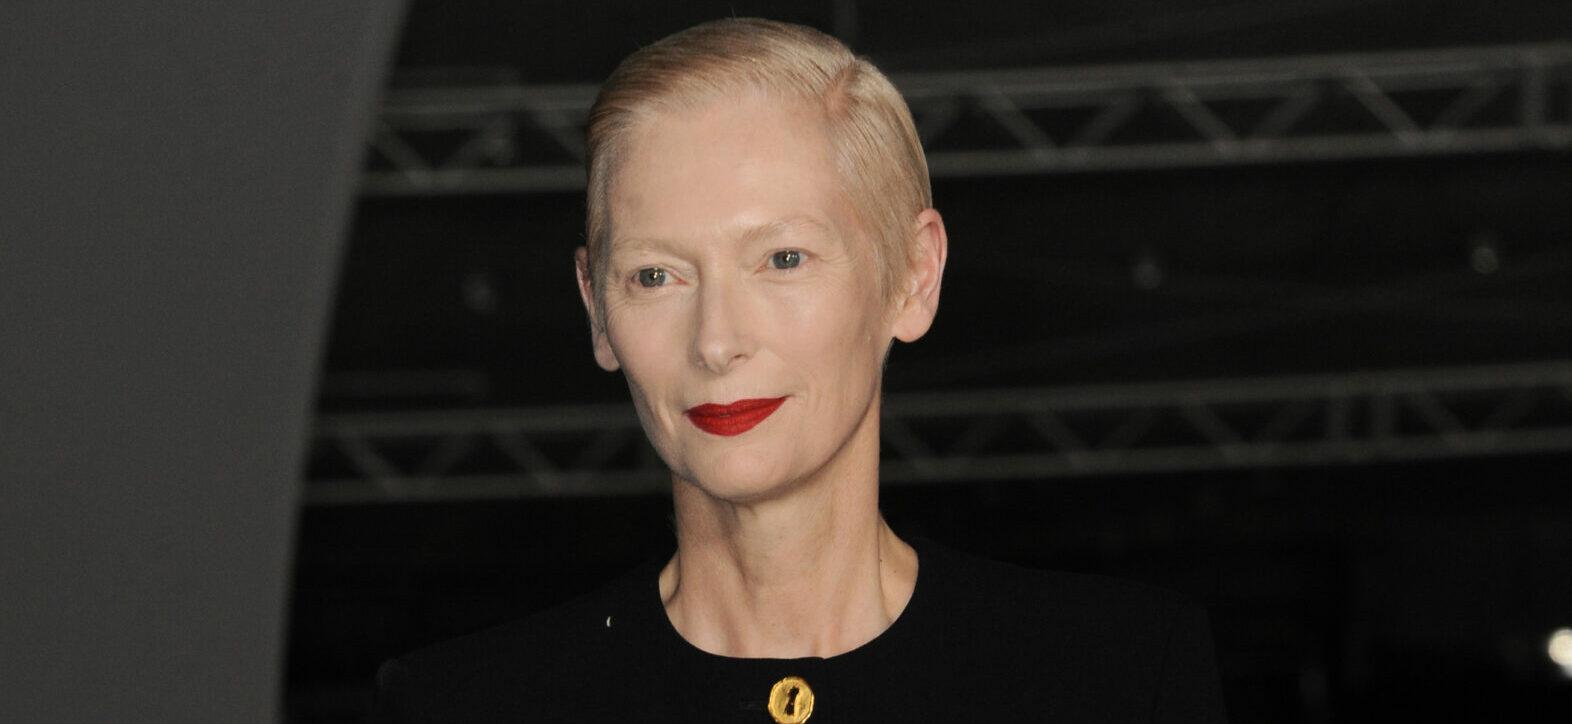 Tilda Swinton No Longer Interested in Observing COVID-19 Protocols On Movie Sets: ‘I Have Faith’